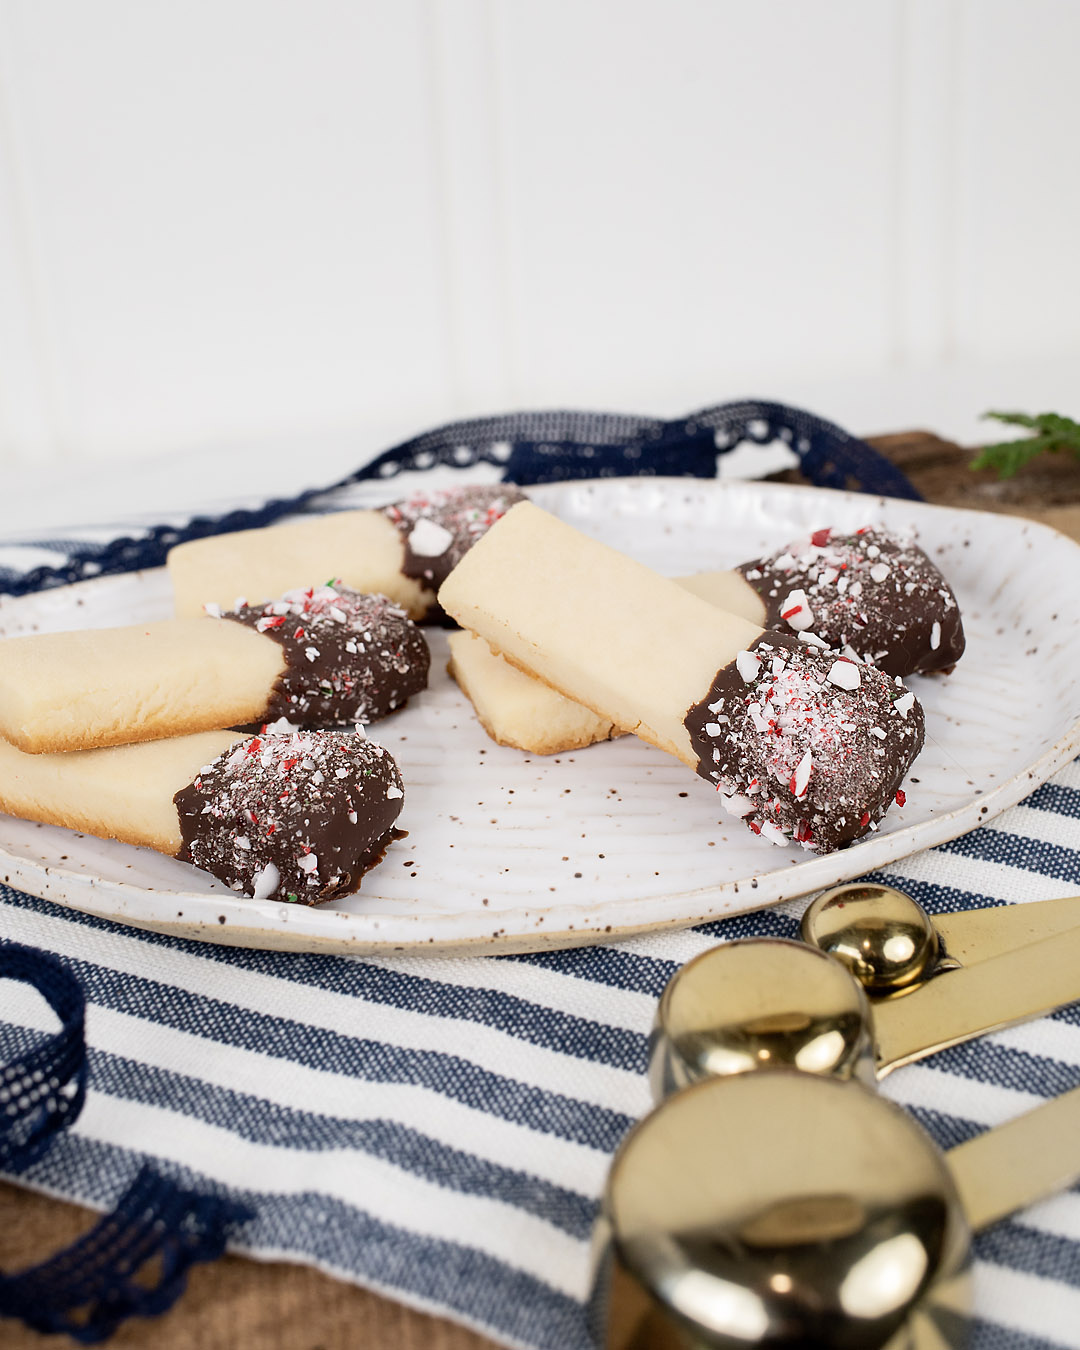 Another fun variation on classic shortbread to add to your cookie tray this holiday season. Here's how to make chocolate-dipped shortbread fingers!